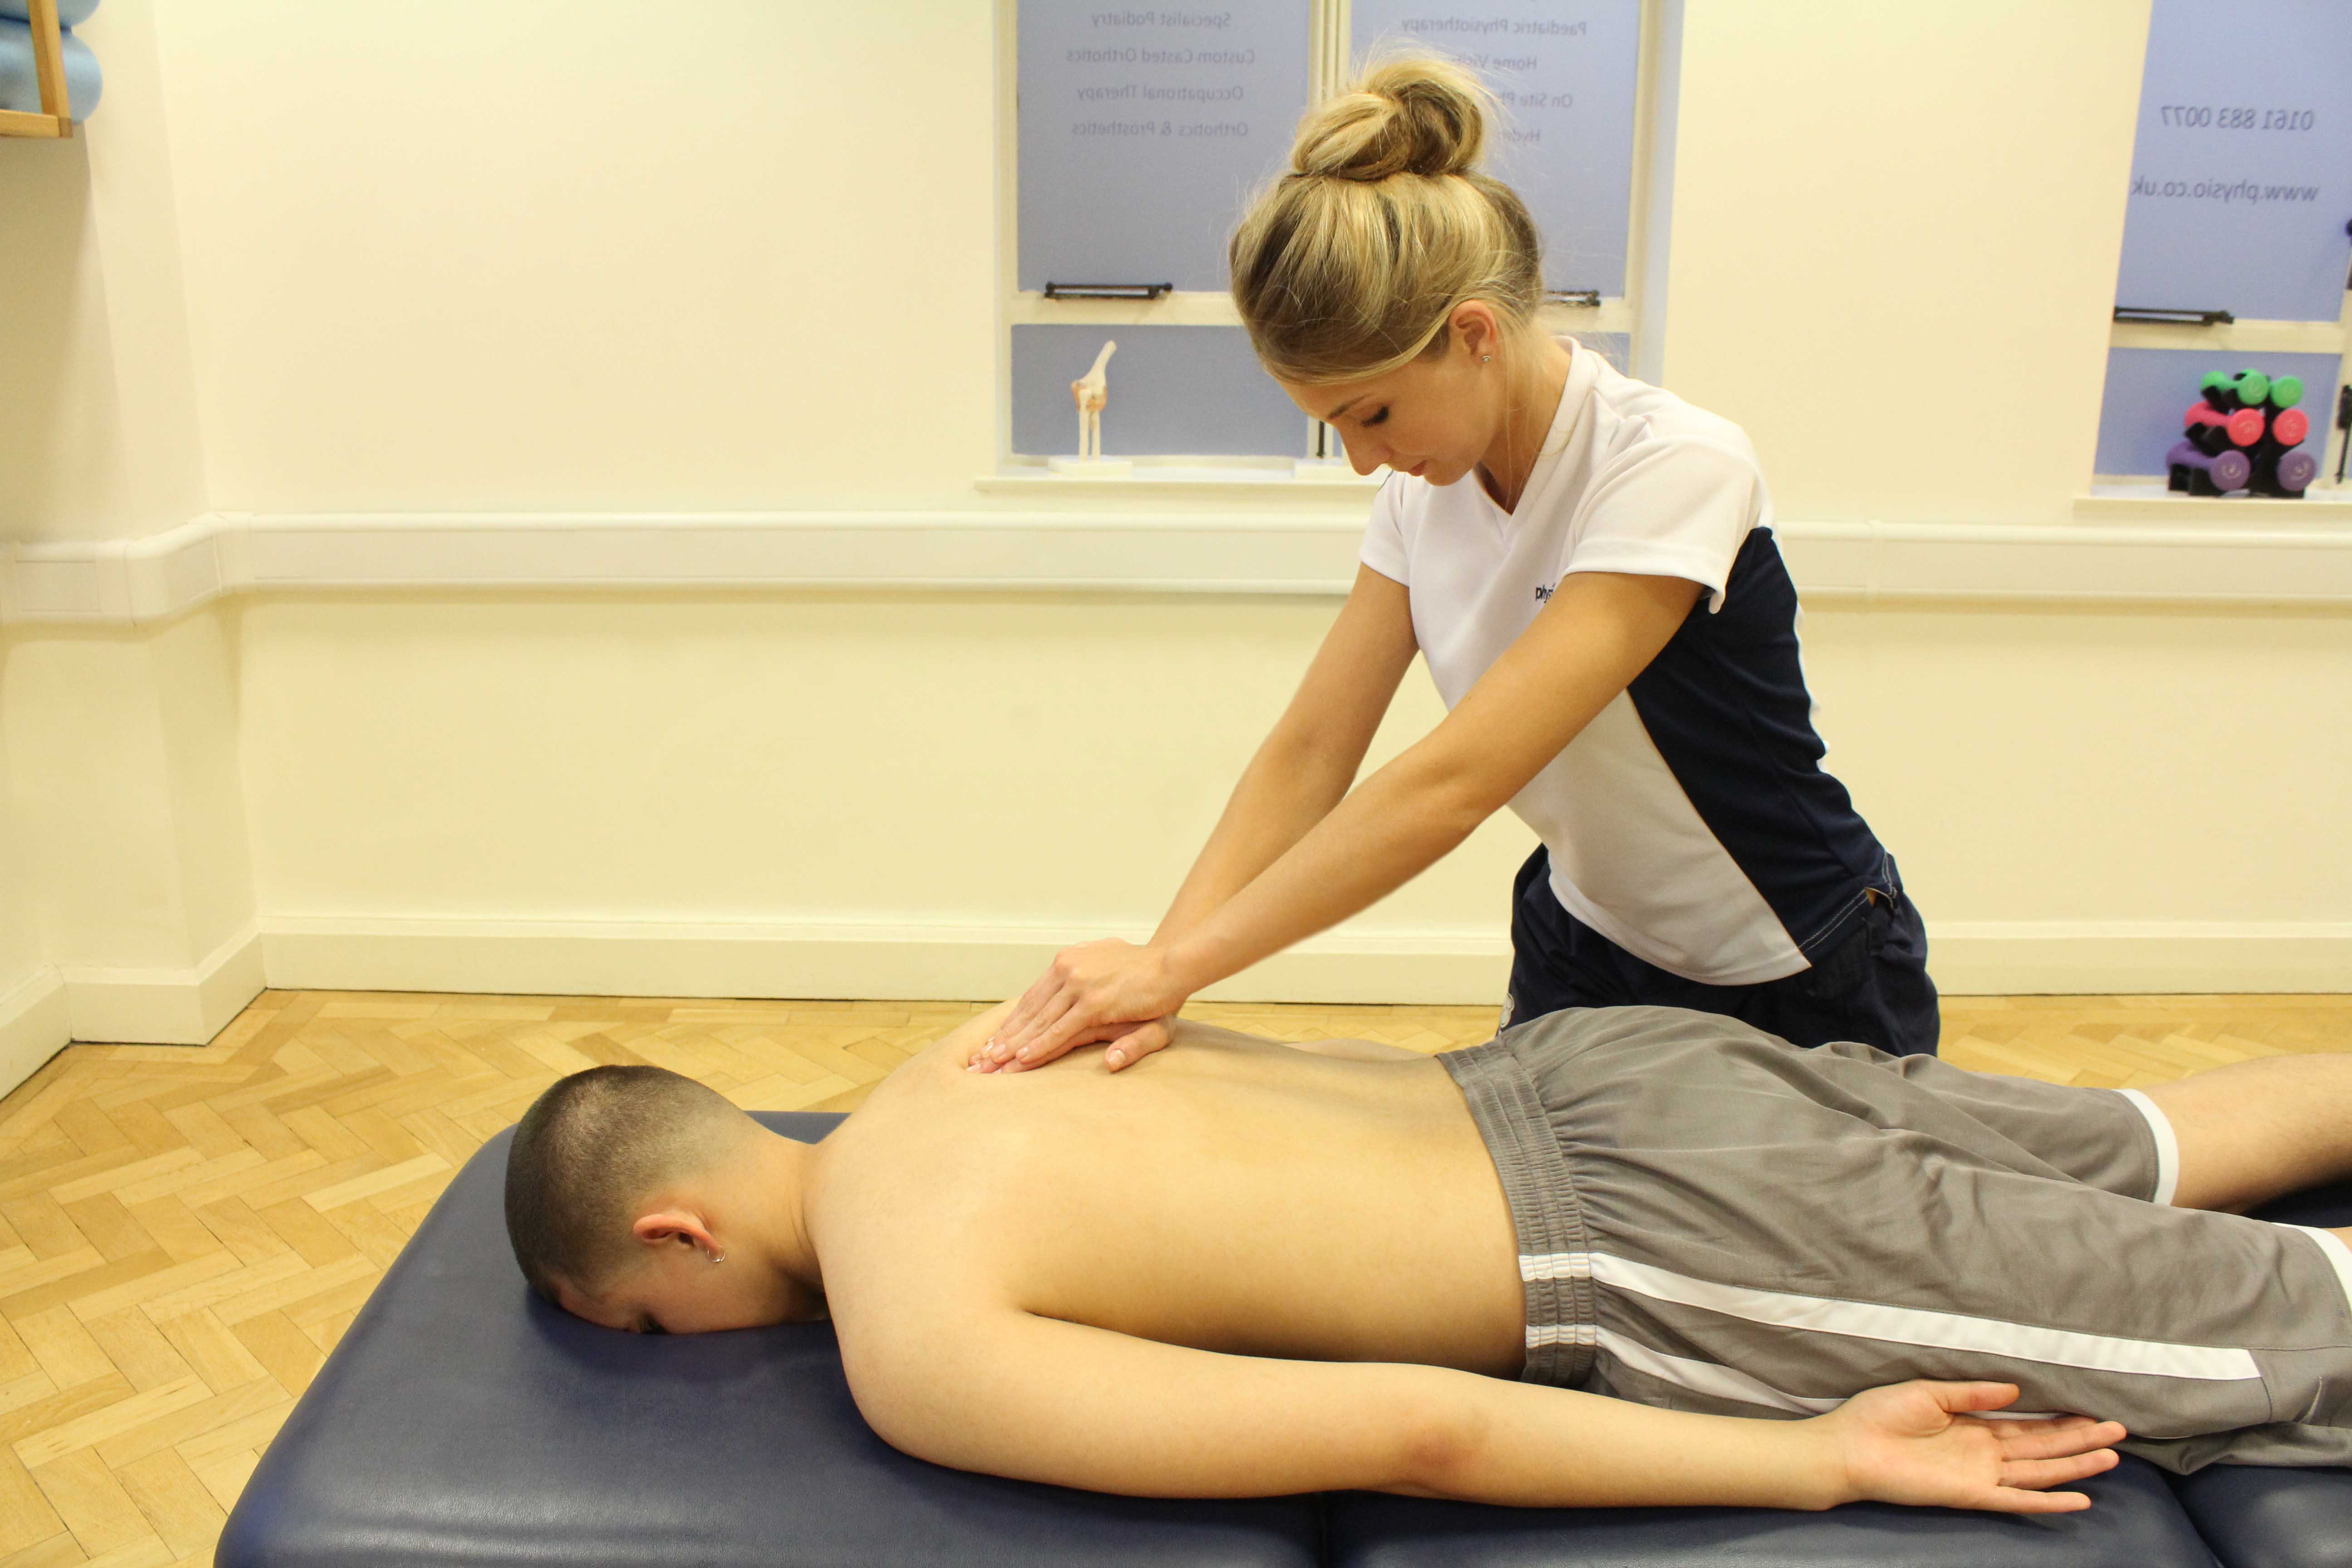 Soft tissue massage applied to the mid thoracic spine region